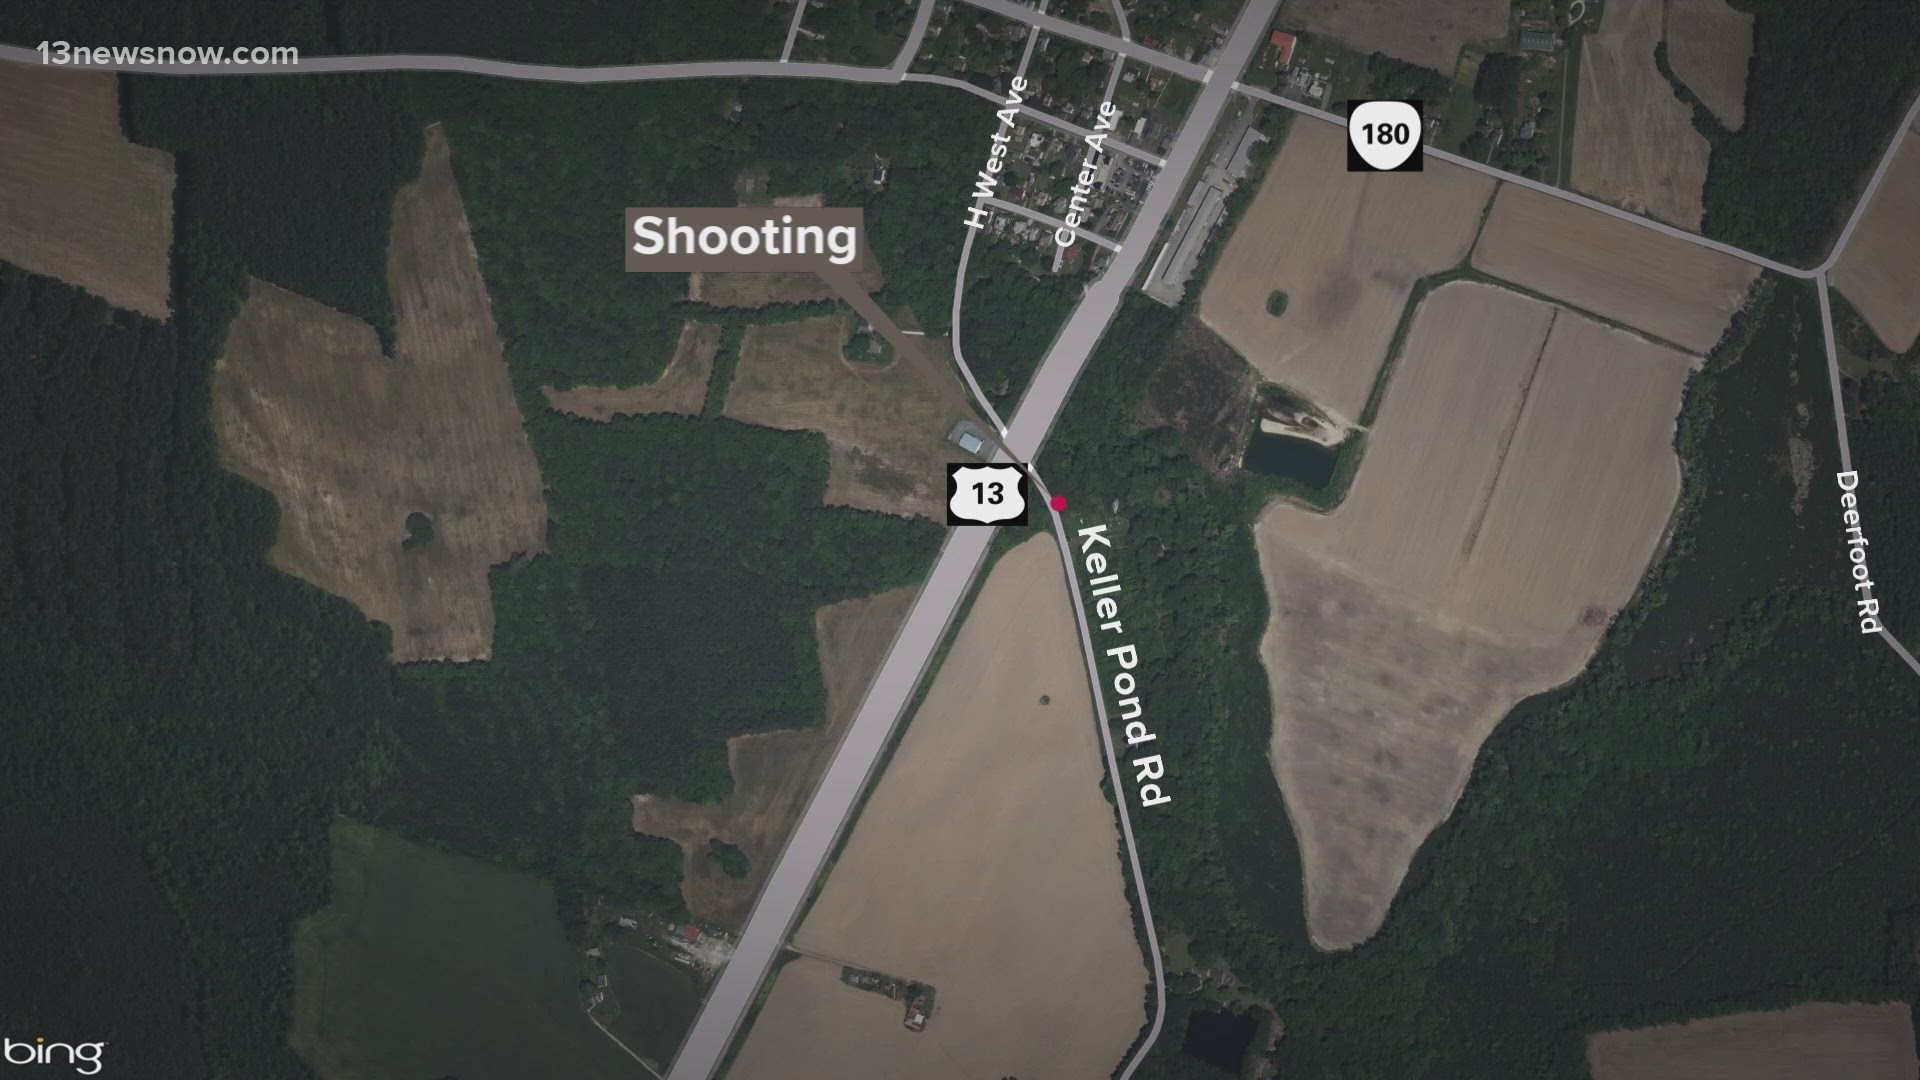 The Sherriff's Office found two people shot near the intersection of Keller Pond Road and Lankford Highway.